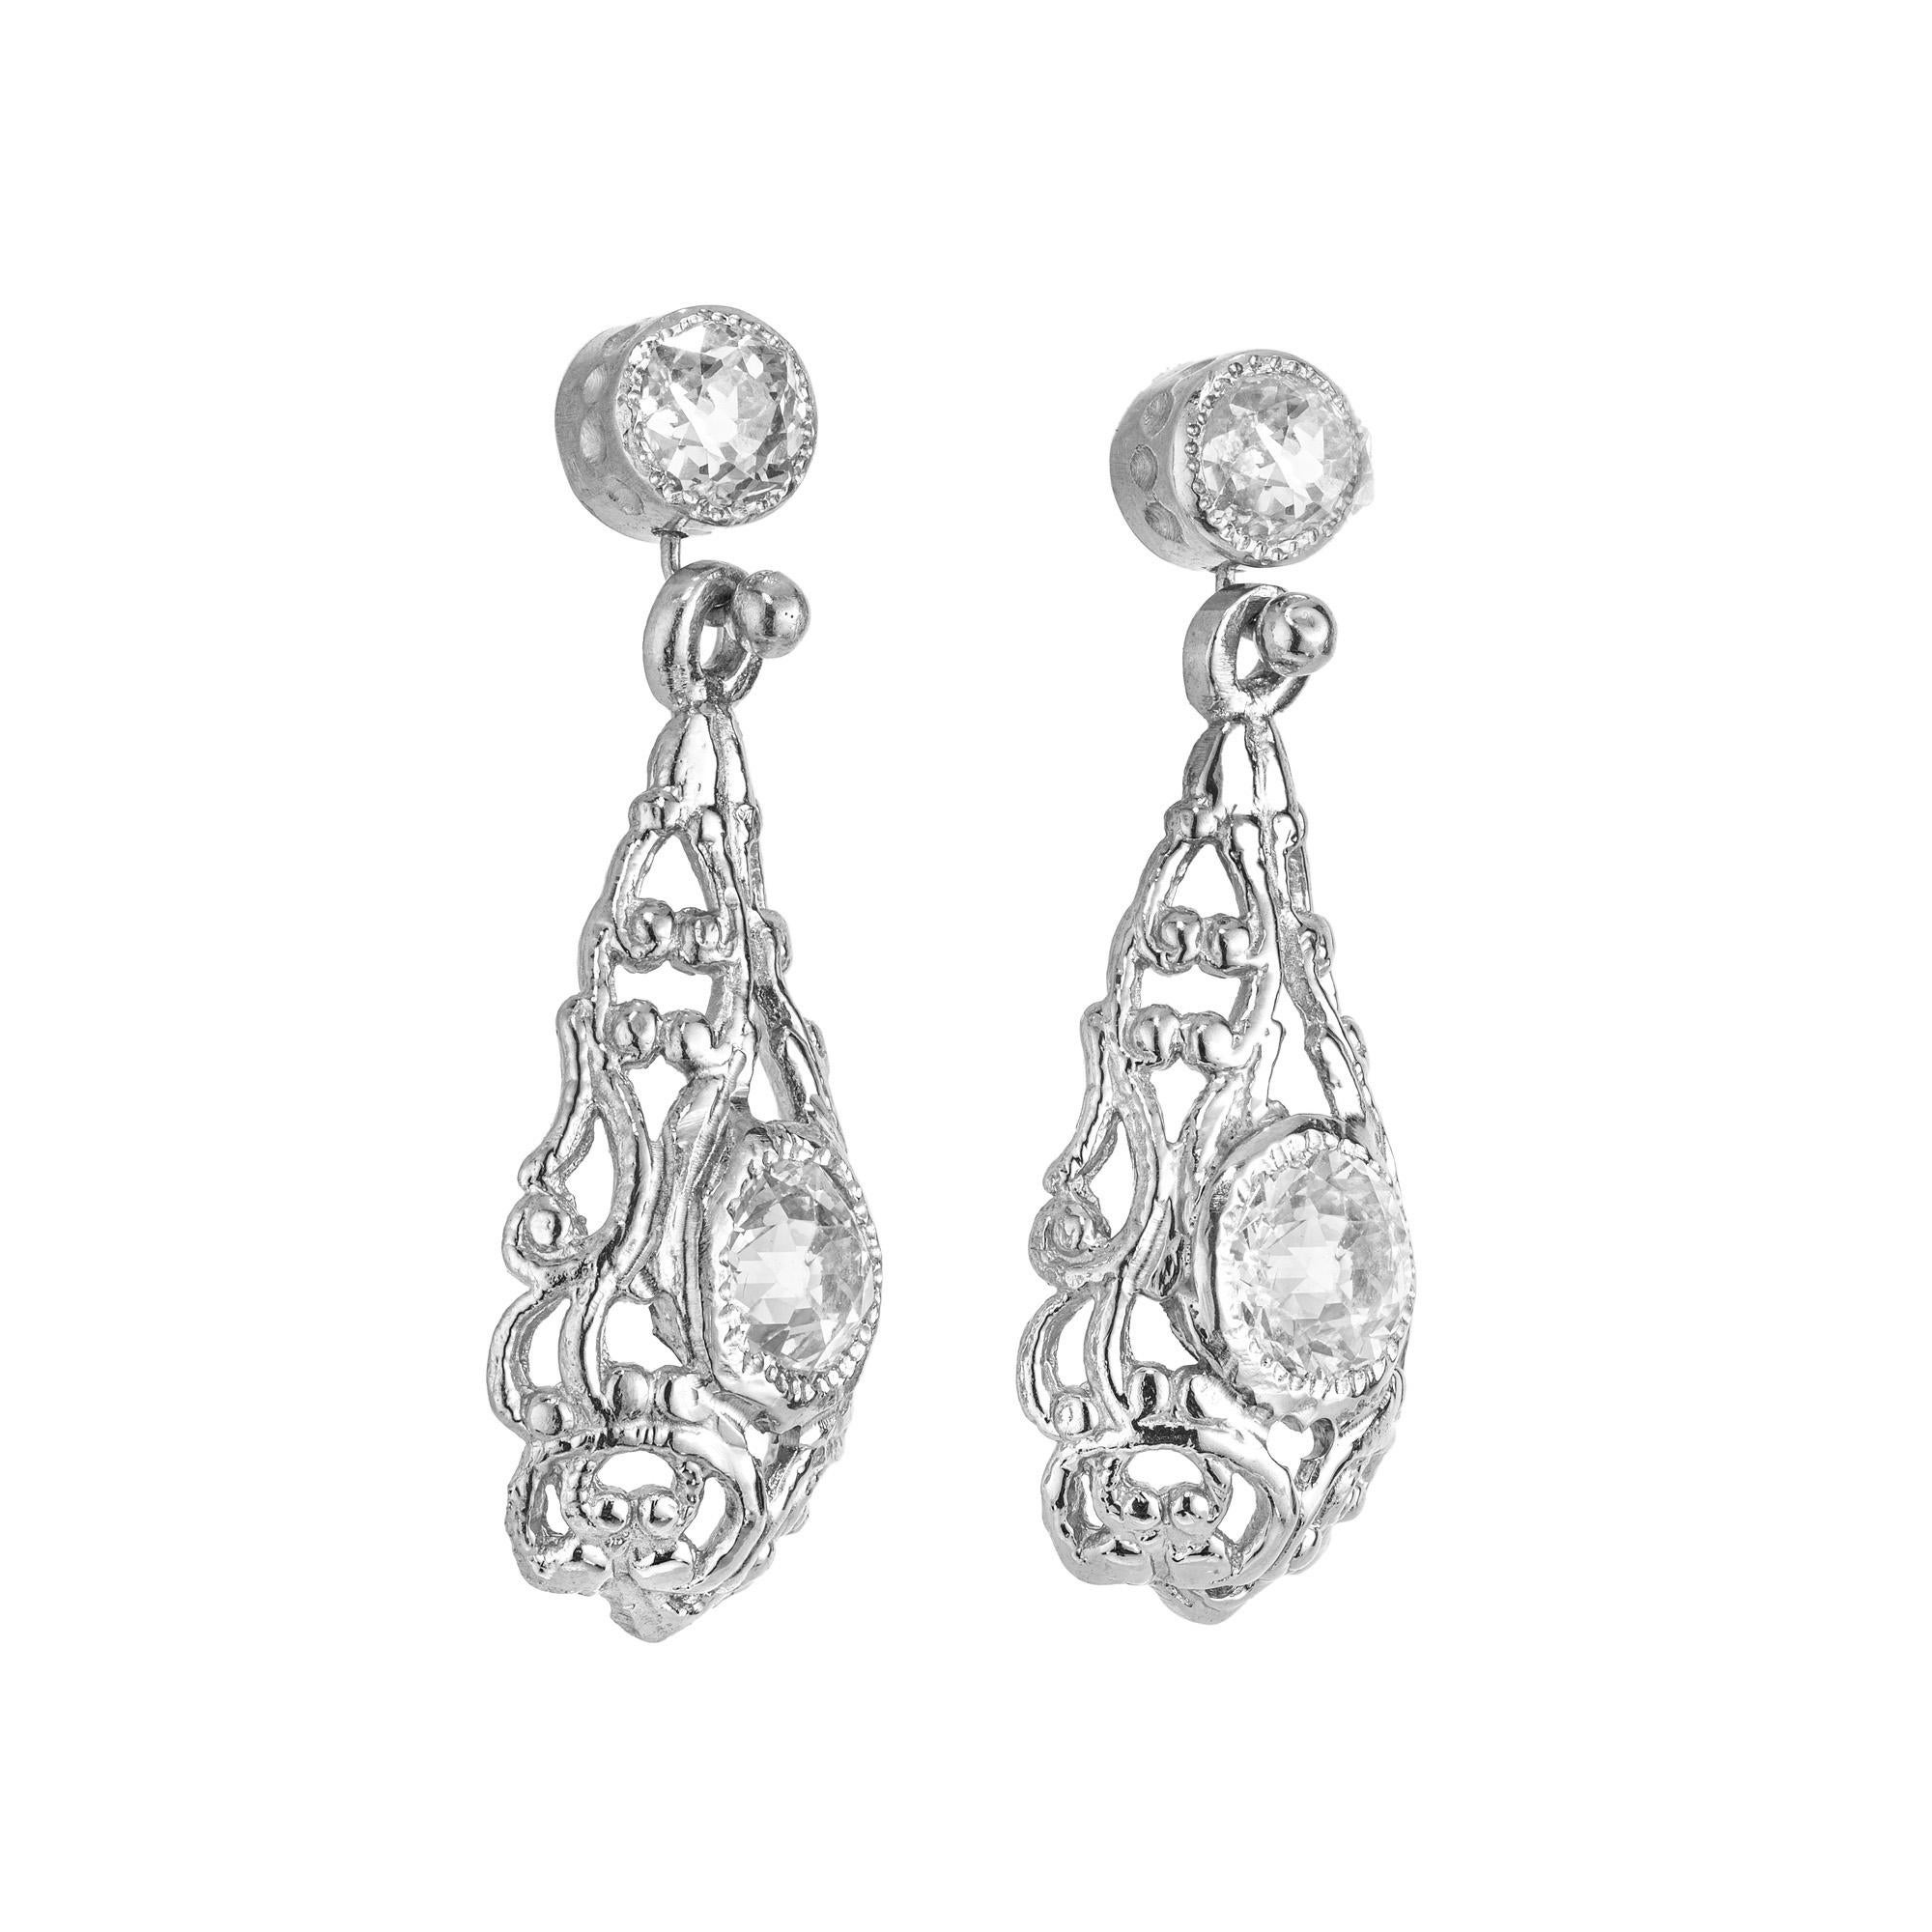 1900’s handmade solid Platinum simple elegant dangle earrings.  All 4 diamonds are fine, bright, white, well cut and old European cut diamonds with raised crowns and small tables.  They have excellent sparkle and brilliance. The top is a simple hand